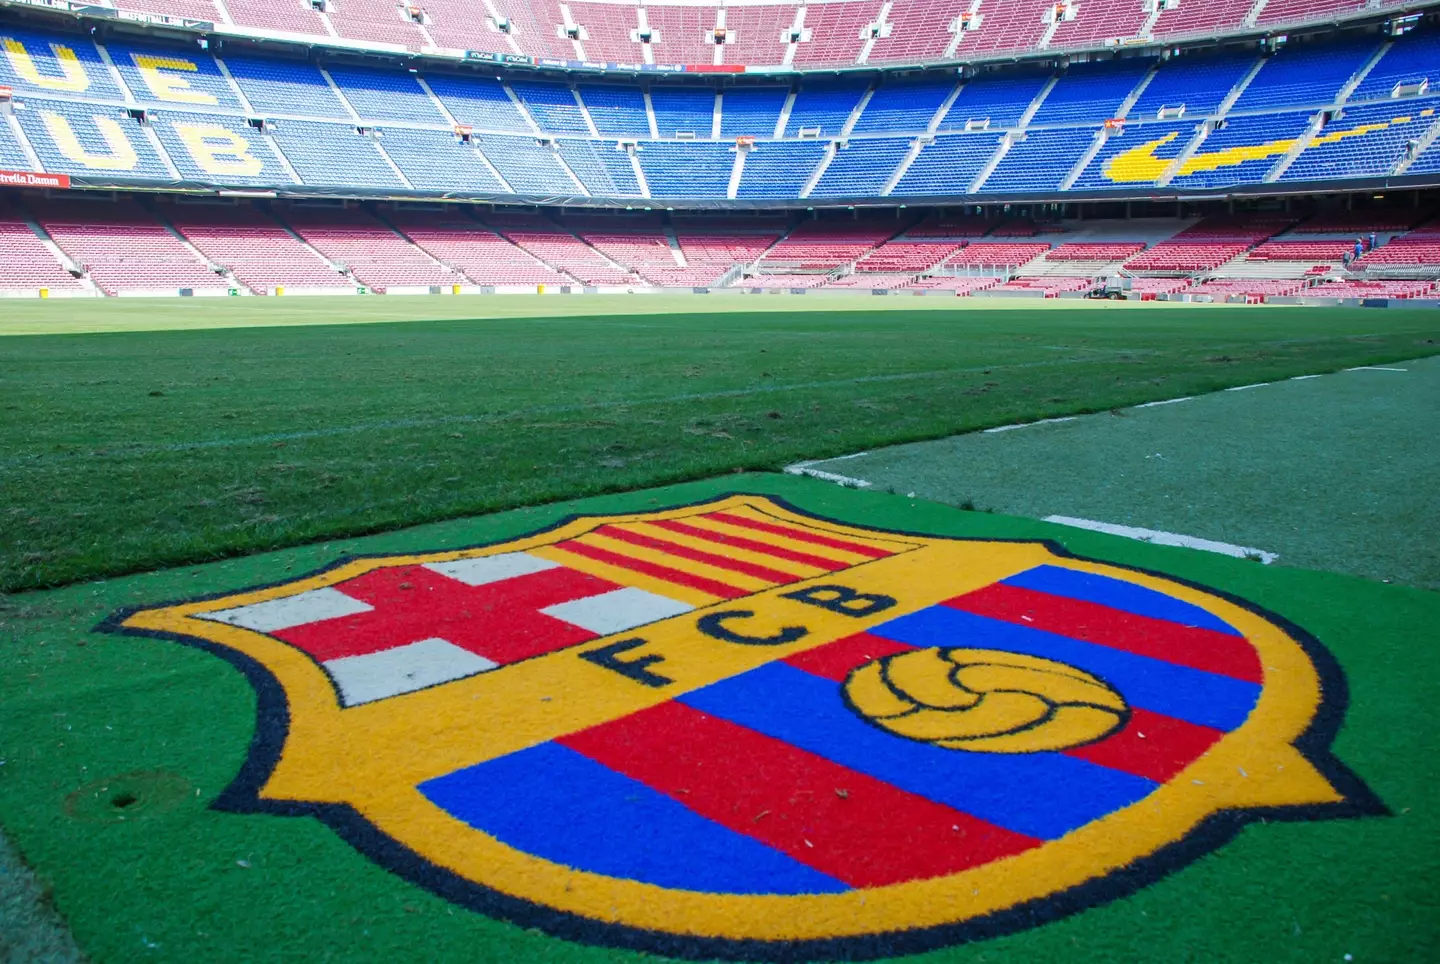 Manchester City face Barcelona at the Nou Camp in midweek (Image: PA)